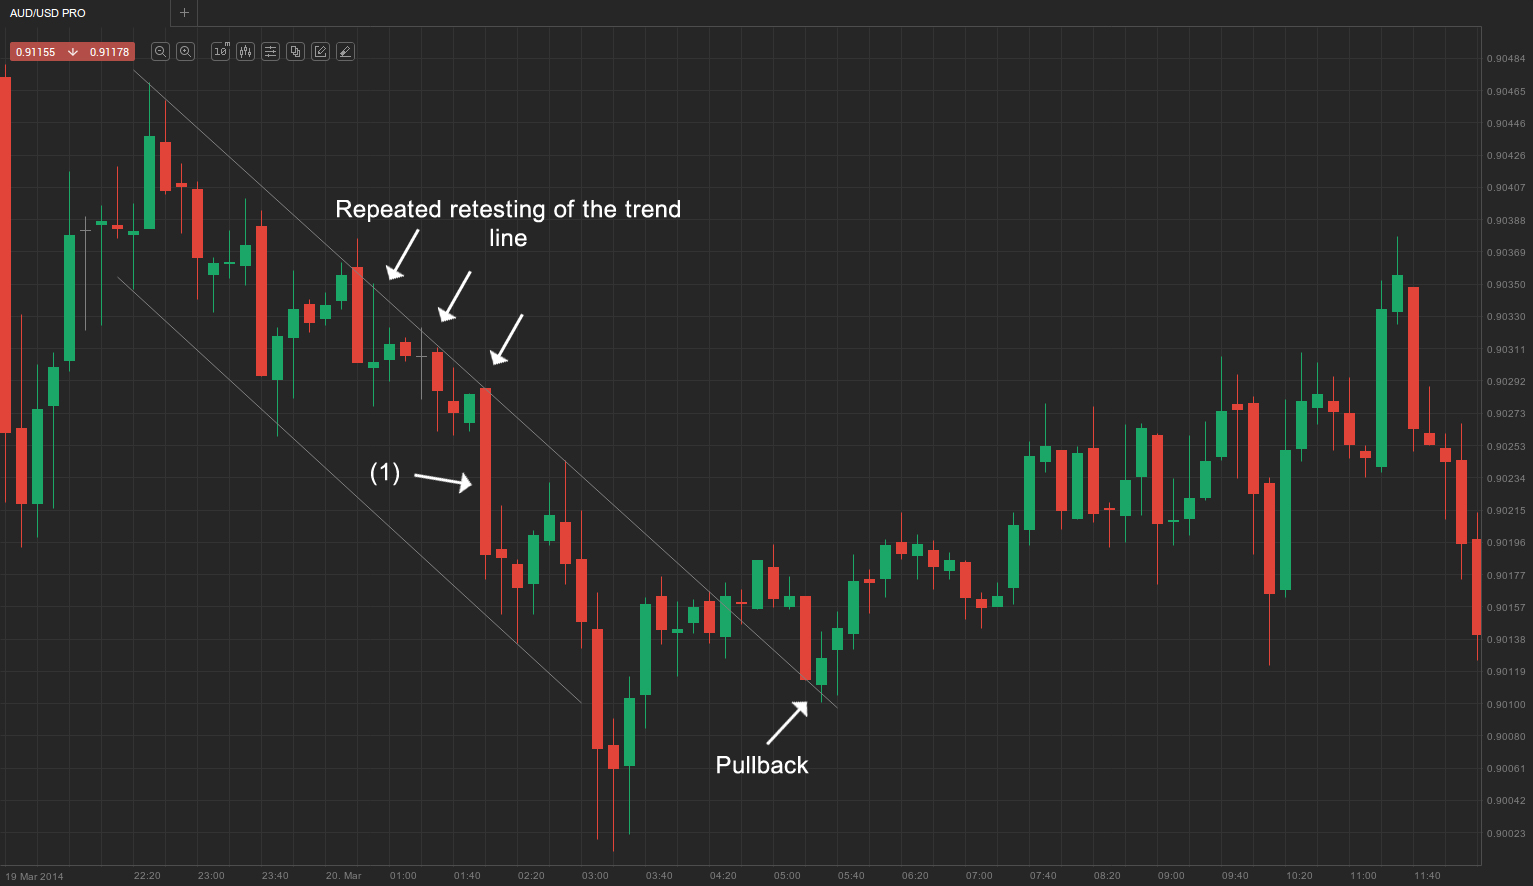 Repeated retest of trend line